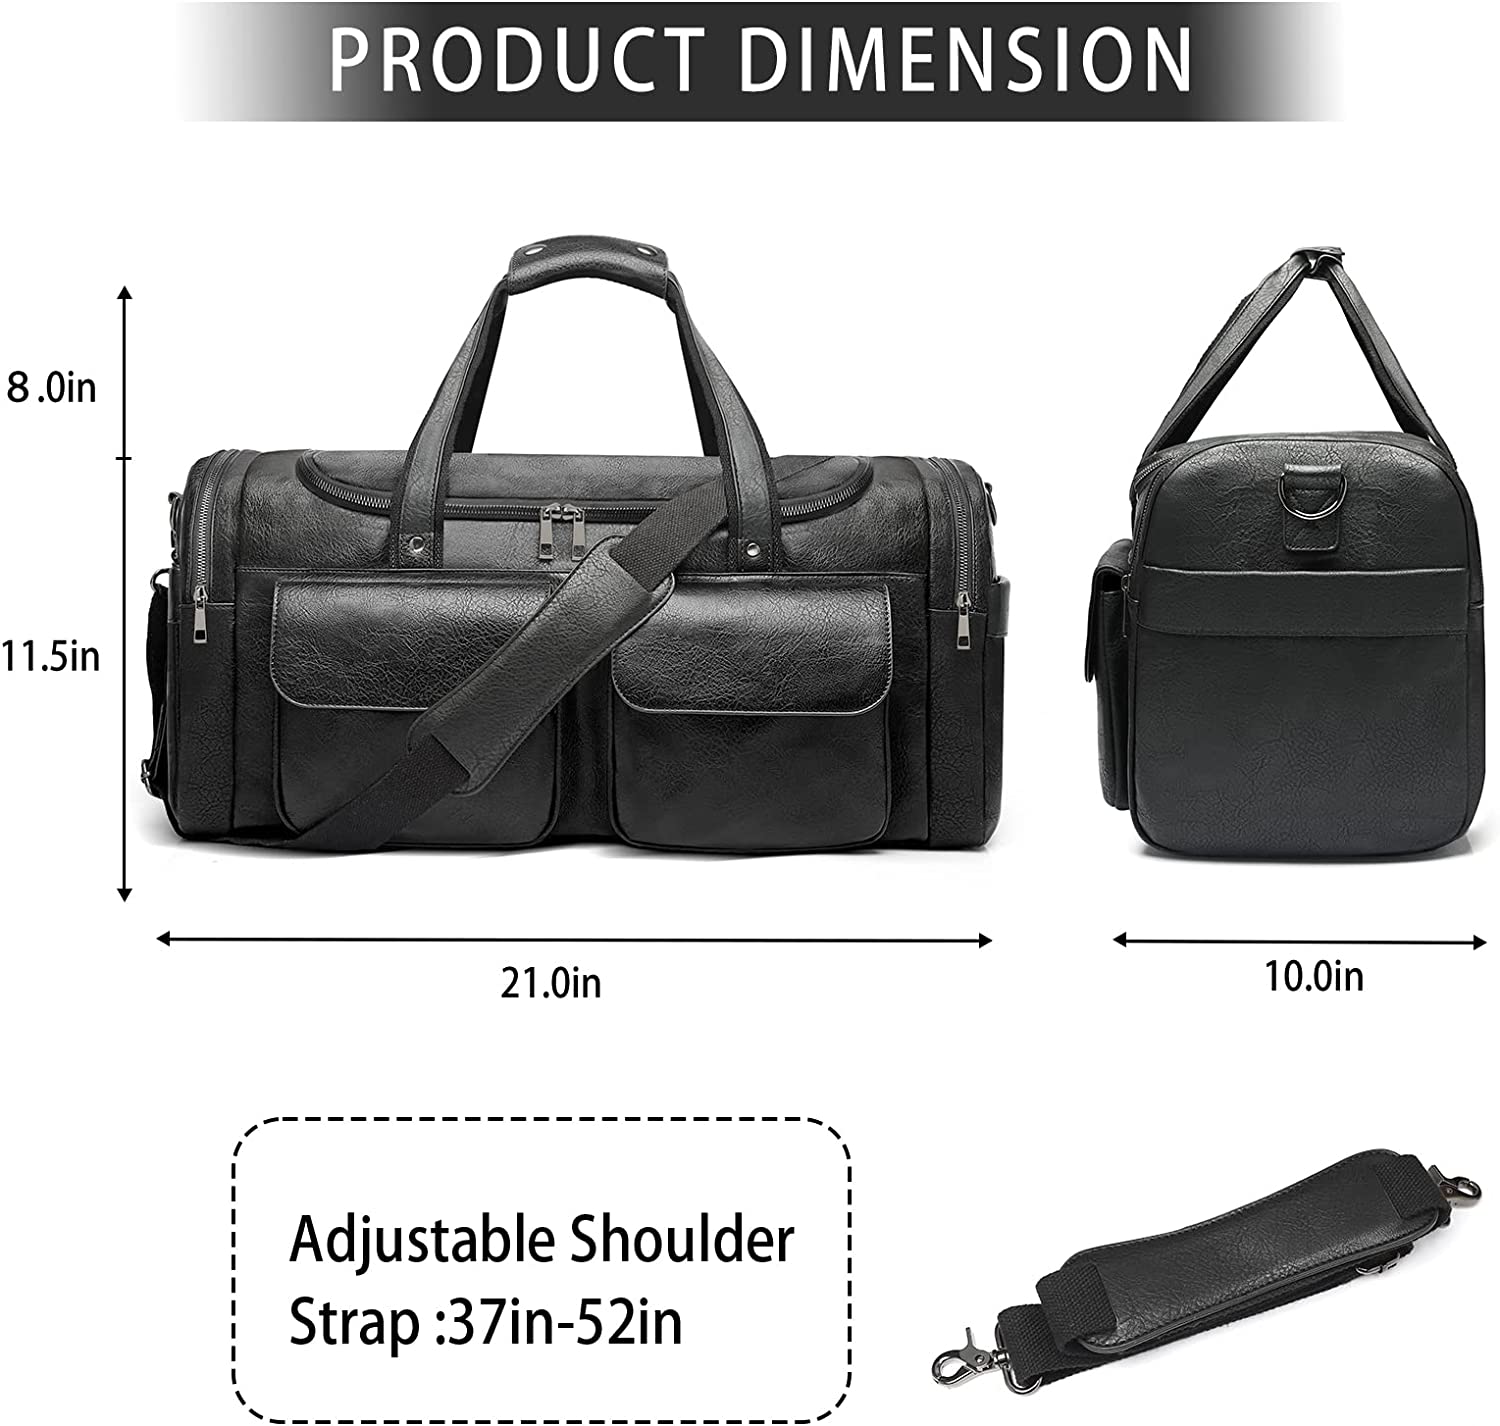 Travel Duffel Bag for Men, Large Carry on Duffle Bag for Traveling